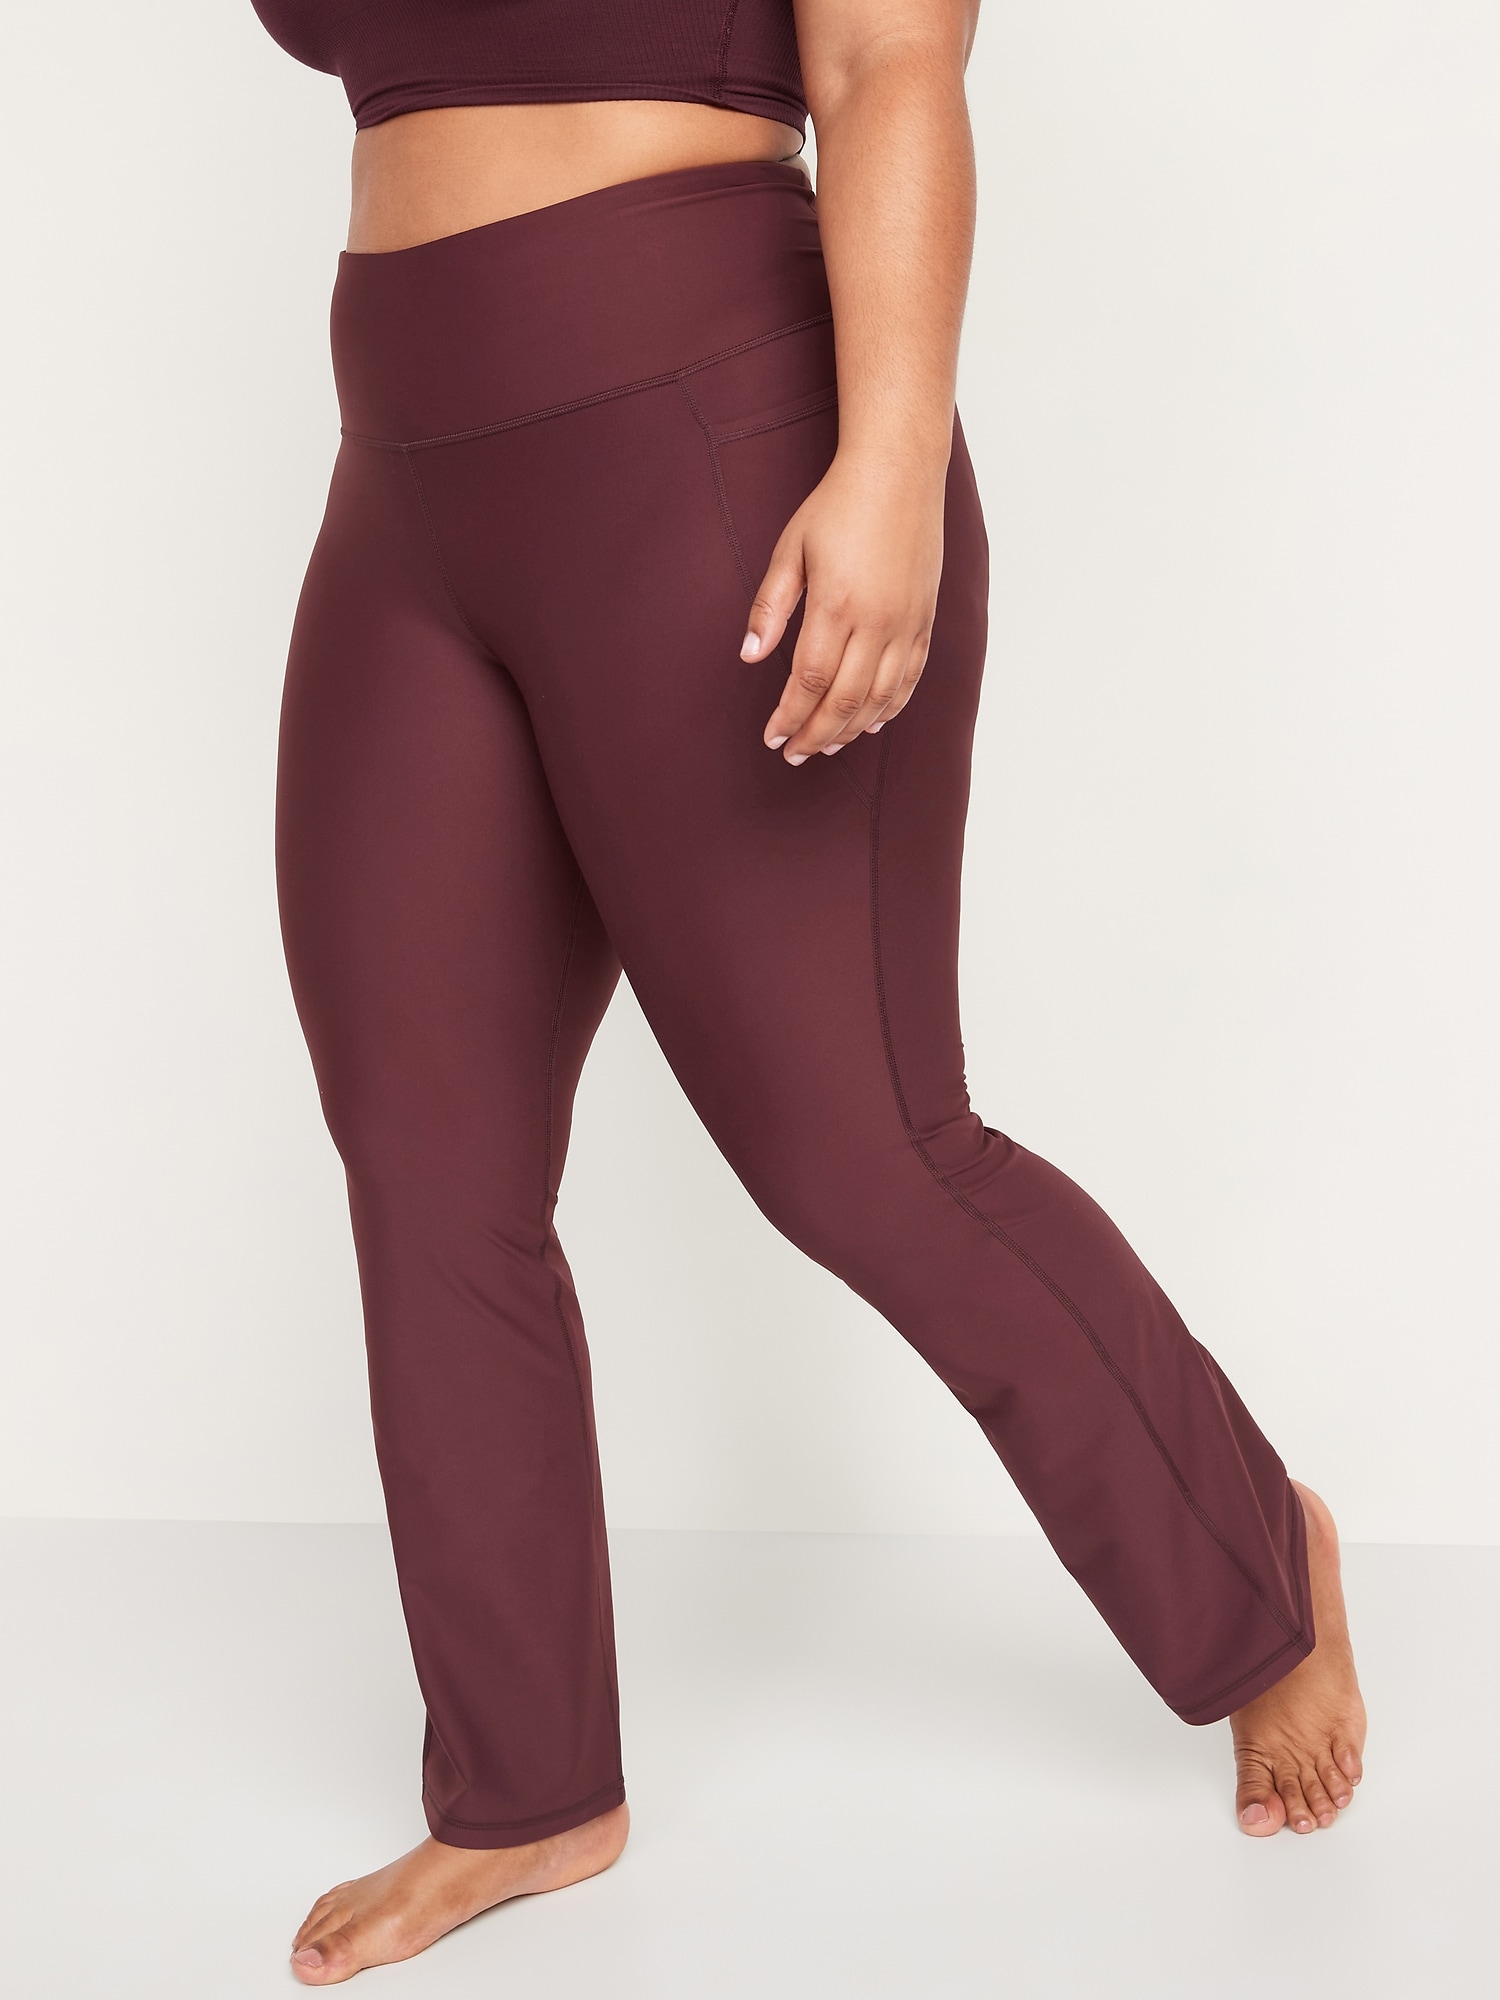 SKIMS Brown Outdoor Foldover Bootcut Leggings - ShopStyle Activewear Pants